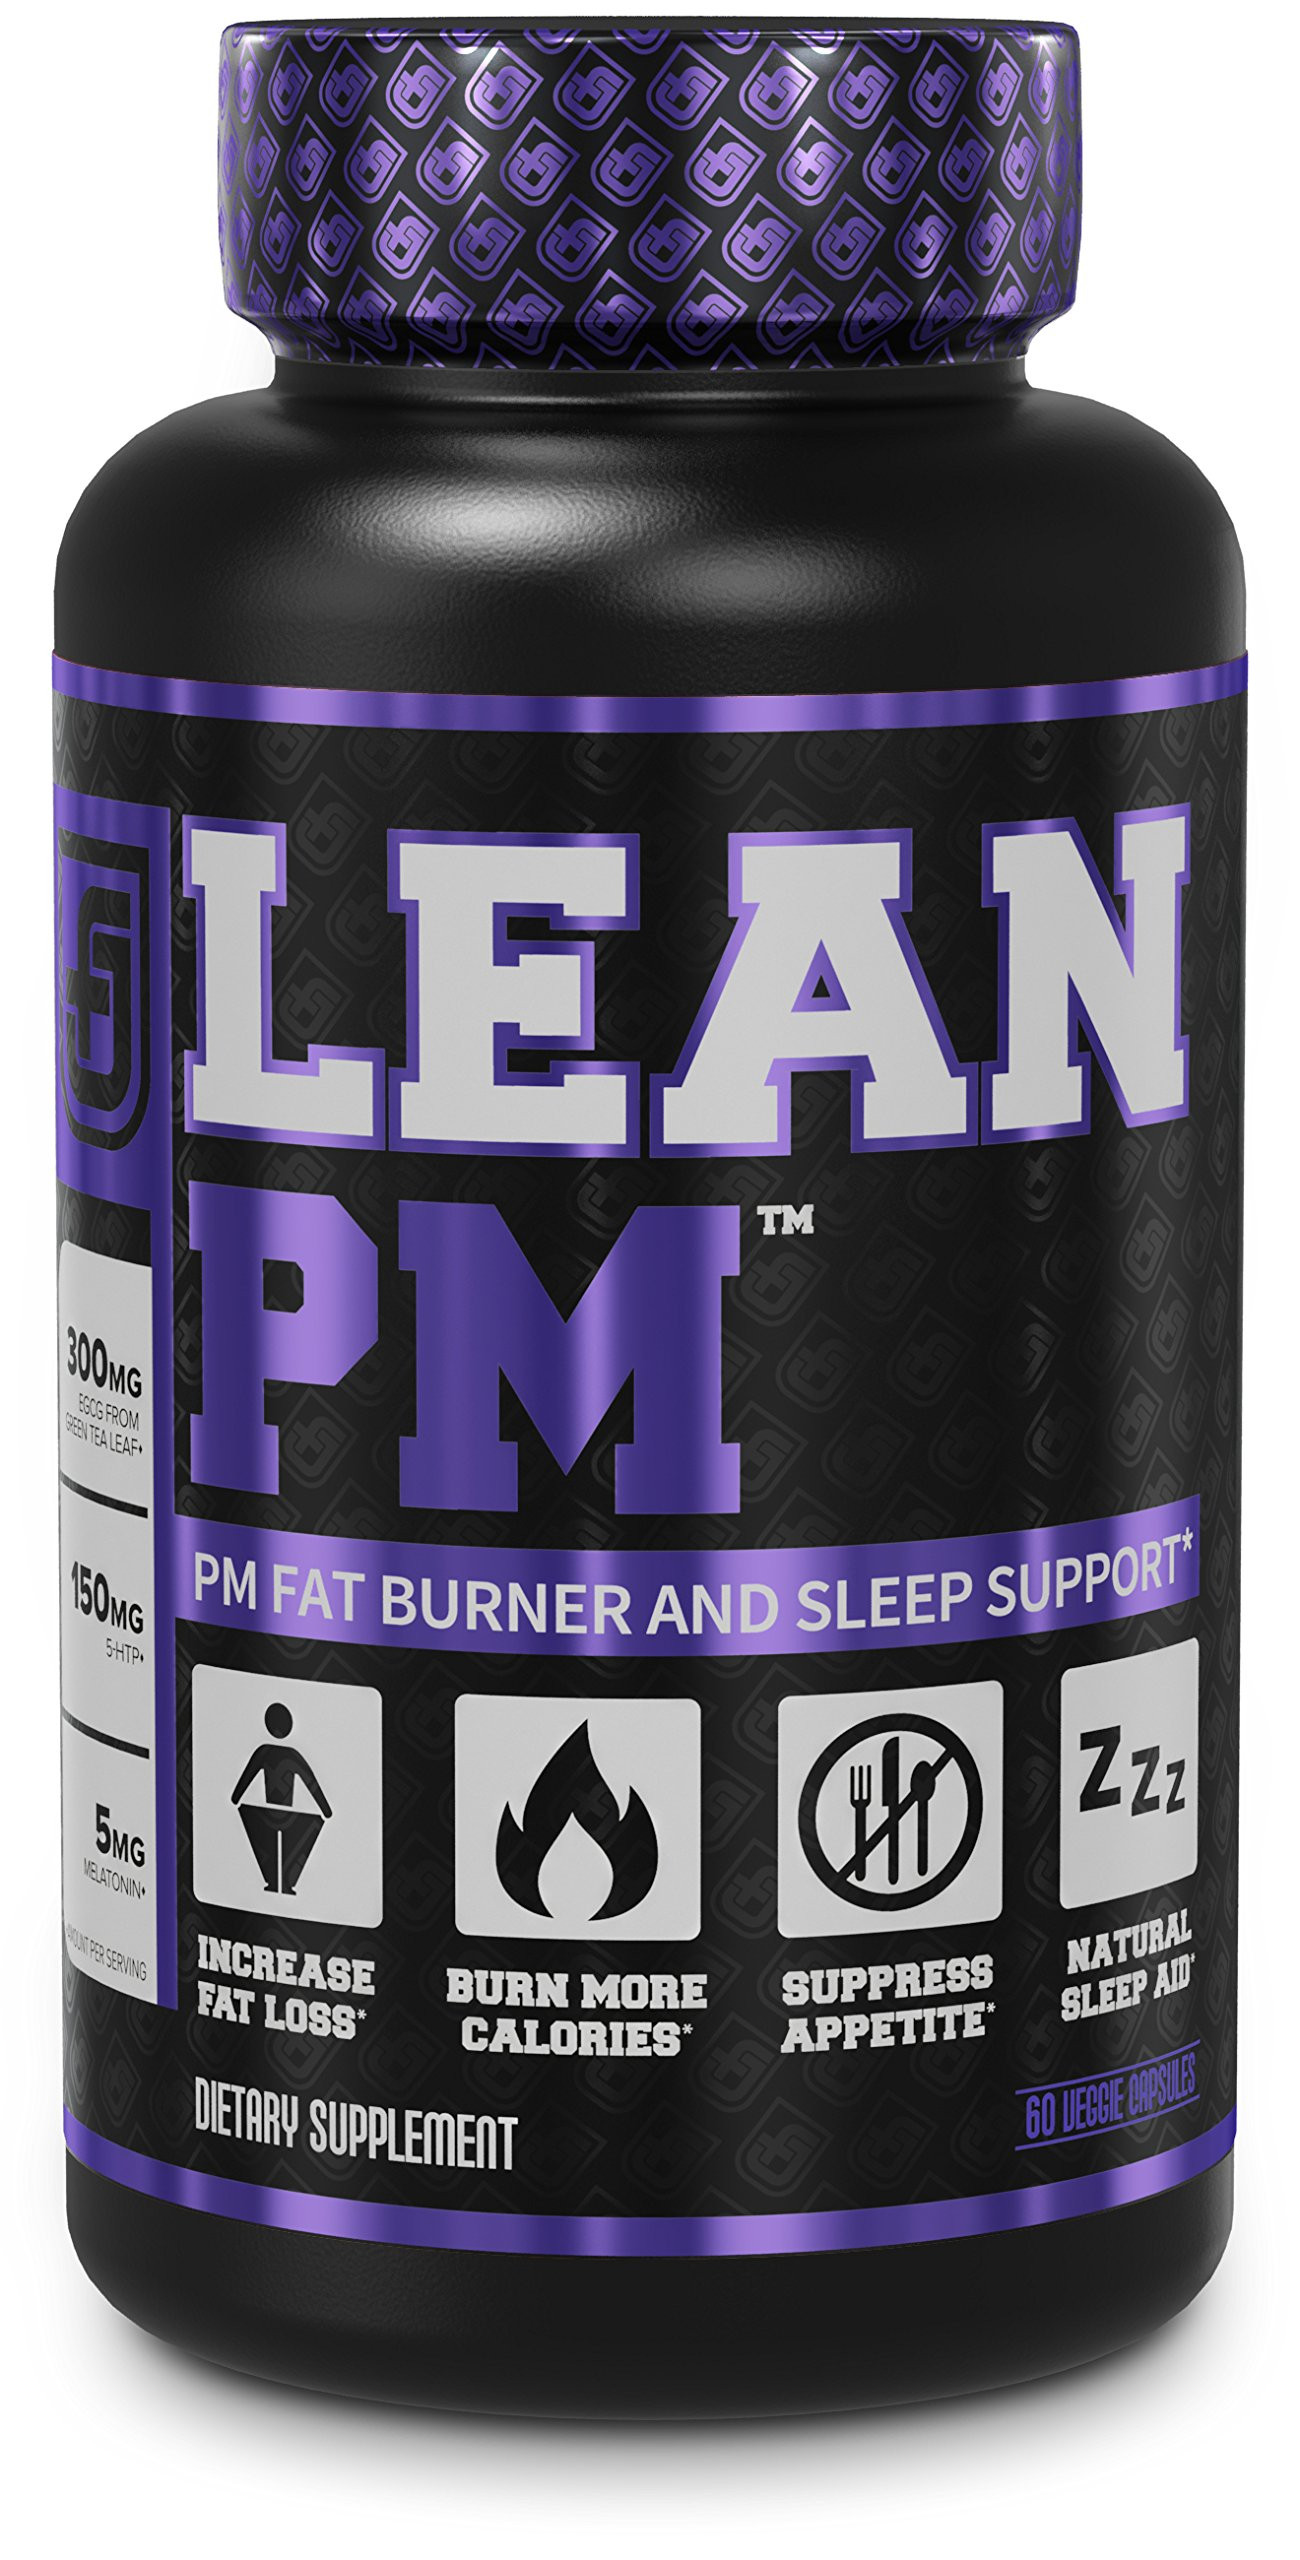 Weight Loss Supplements Fat Burning
 LEAN PM Night Time Fat Burner Sleep Aid Supplement